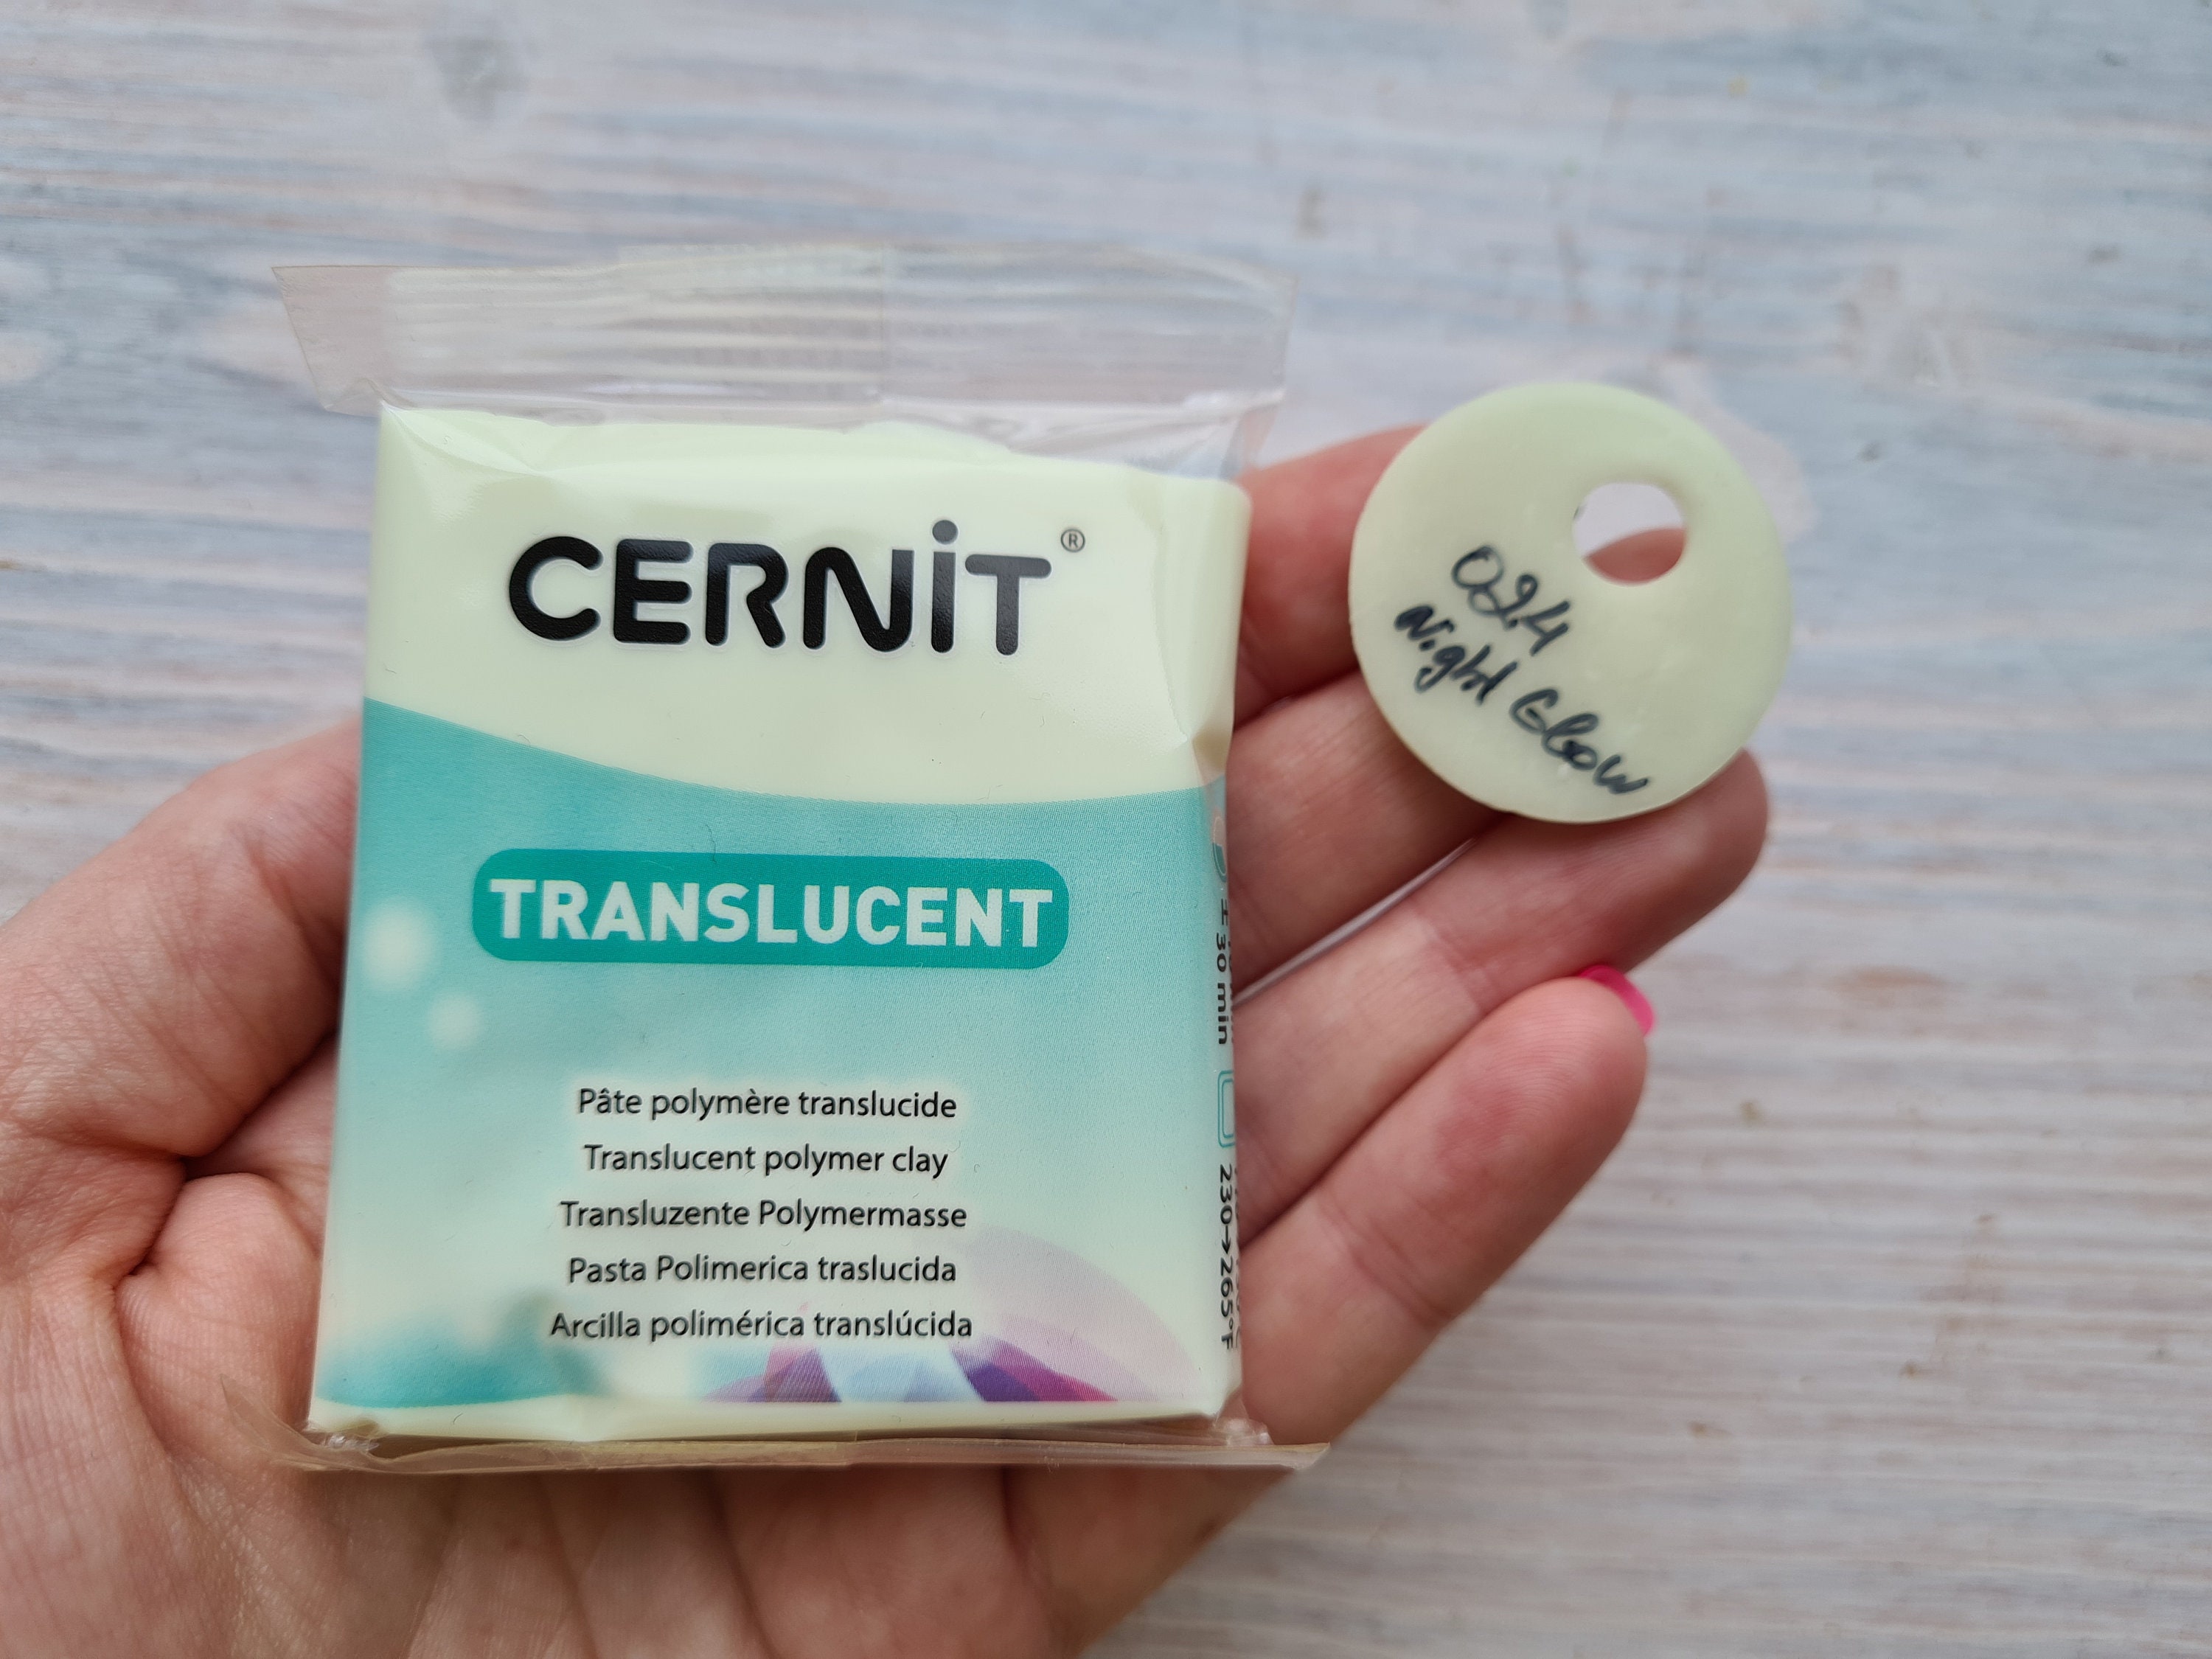 CERNIT Translucent Serie Polymer Clay, Amber, Nr. 721, 56g 2oz,  Oven-hardening Polymer Modeling Clay 